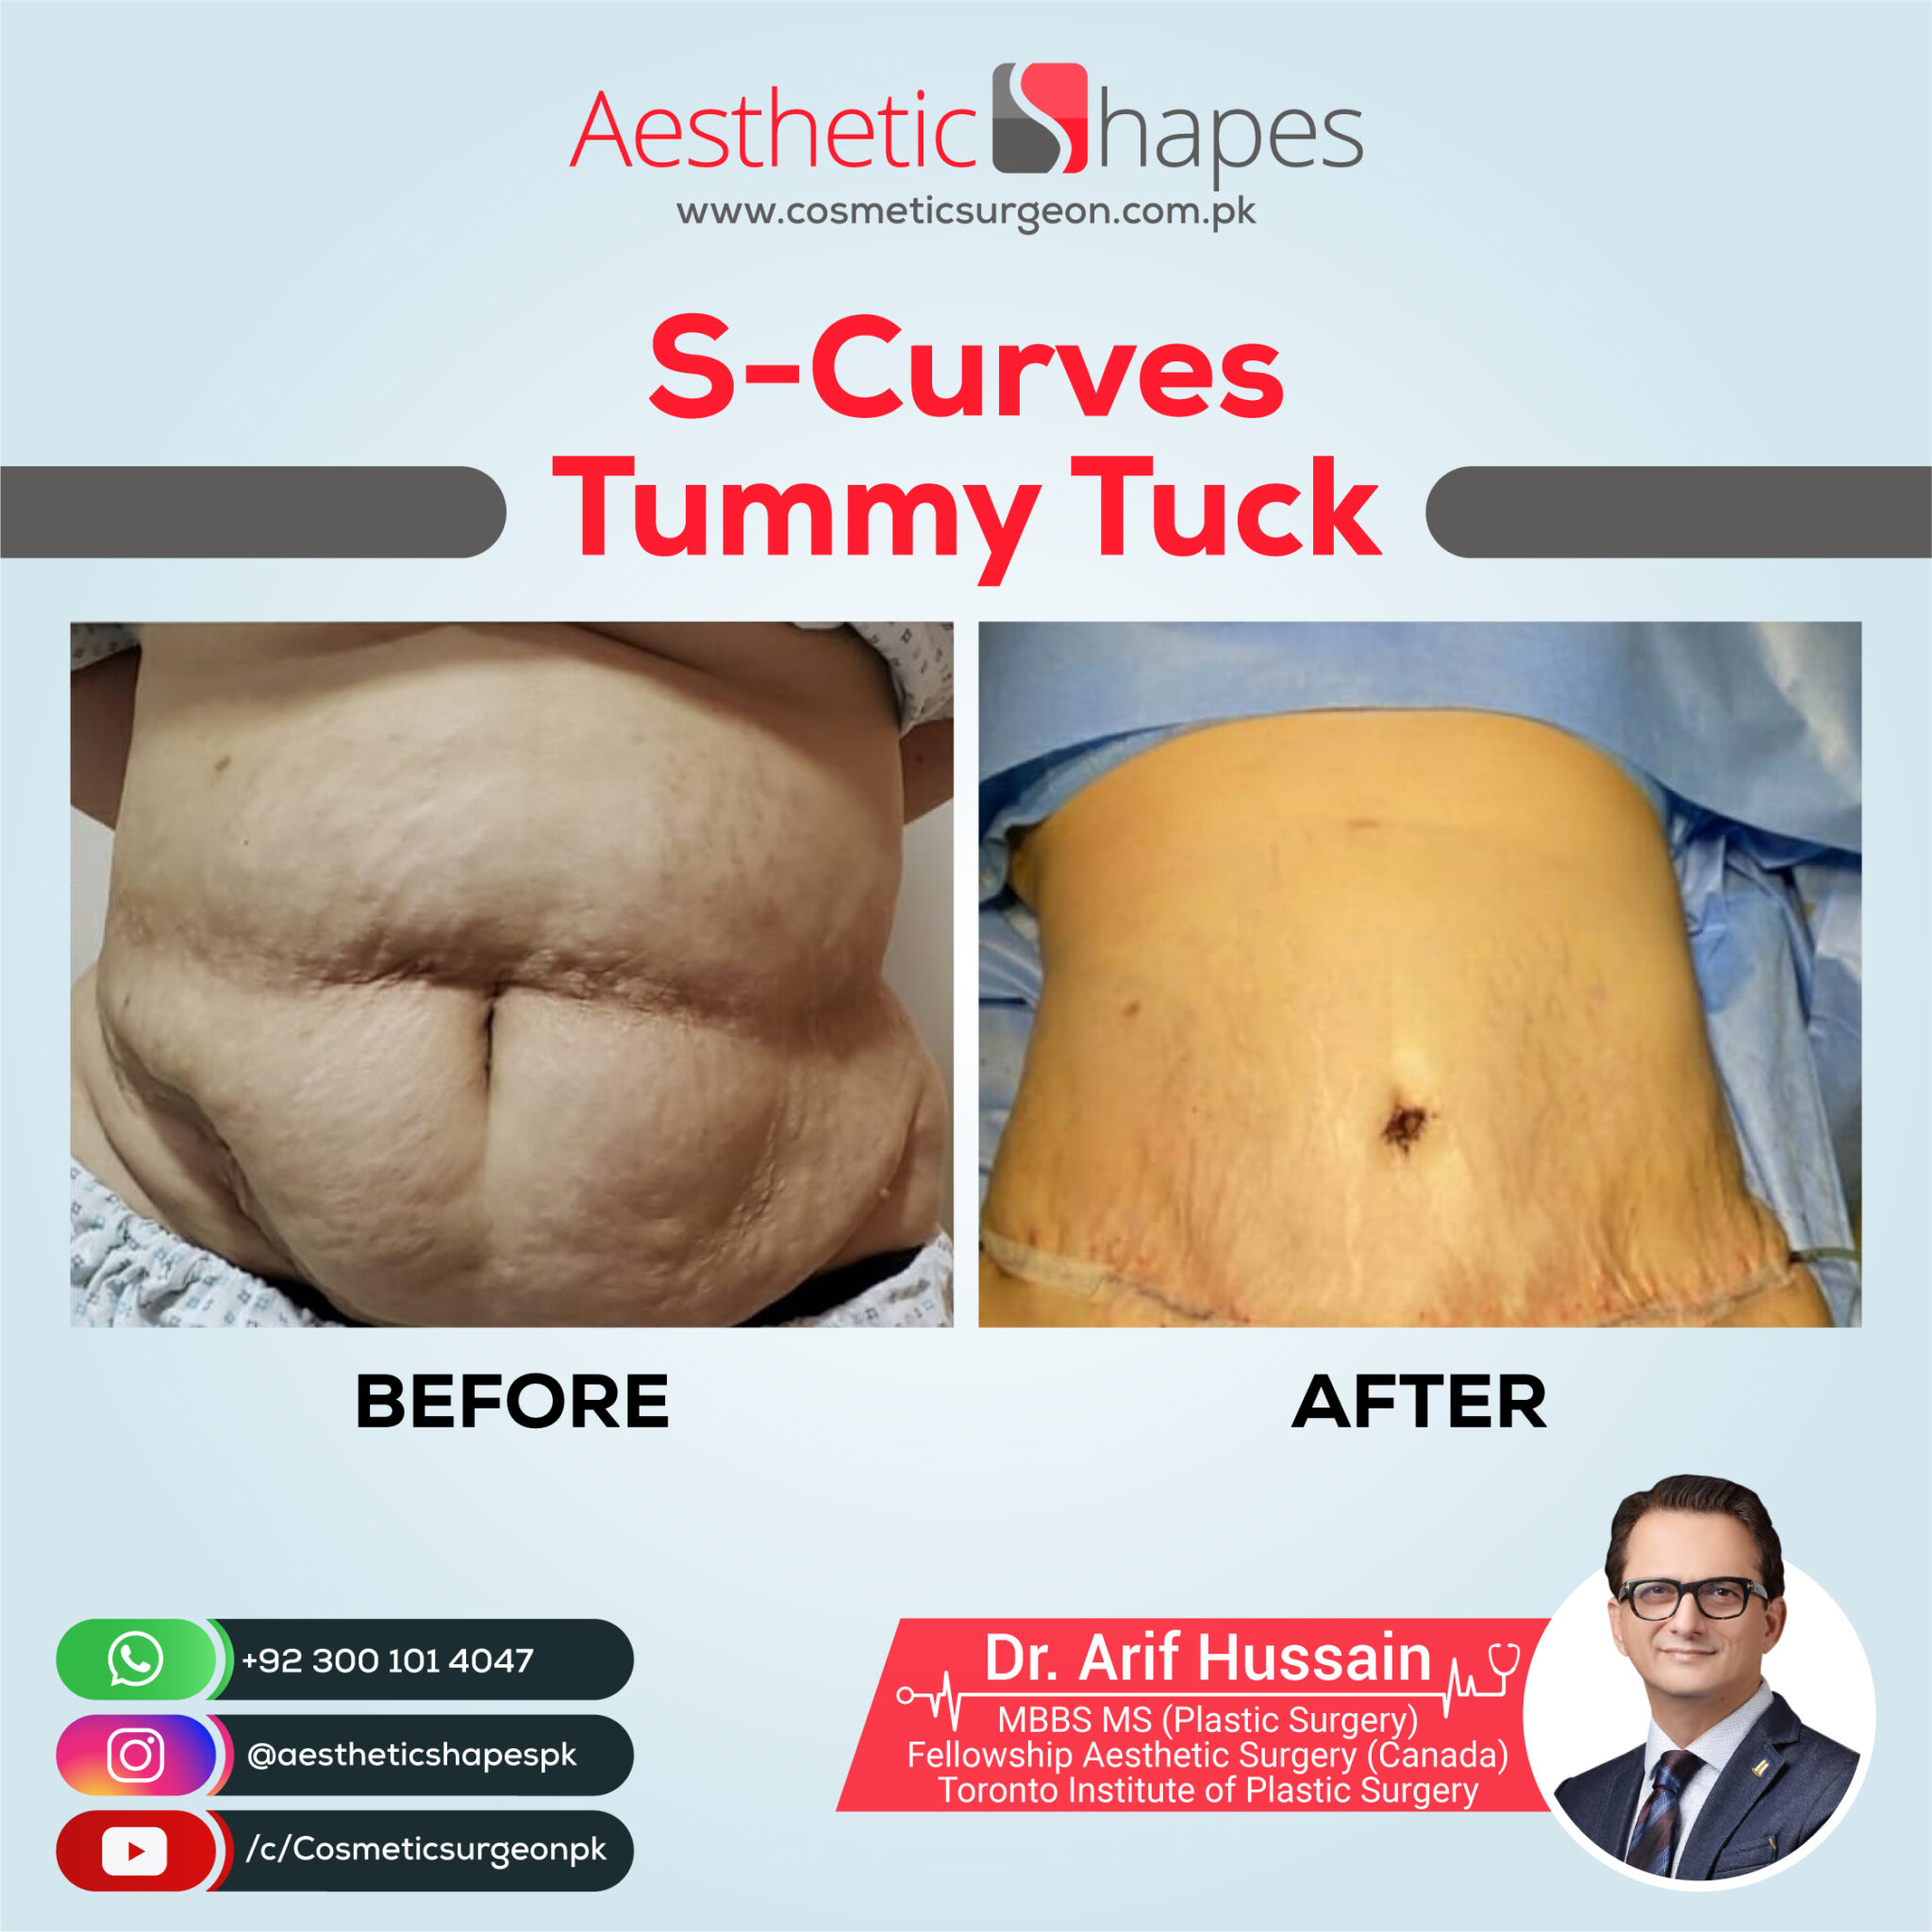 https://cosmeticsurgeon.com.pk/wp-content/uploads/2022/02/s-curves-tummy-tuck-facebook-page-dr-arif-hussain-scaled.jpg